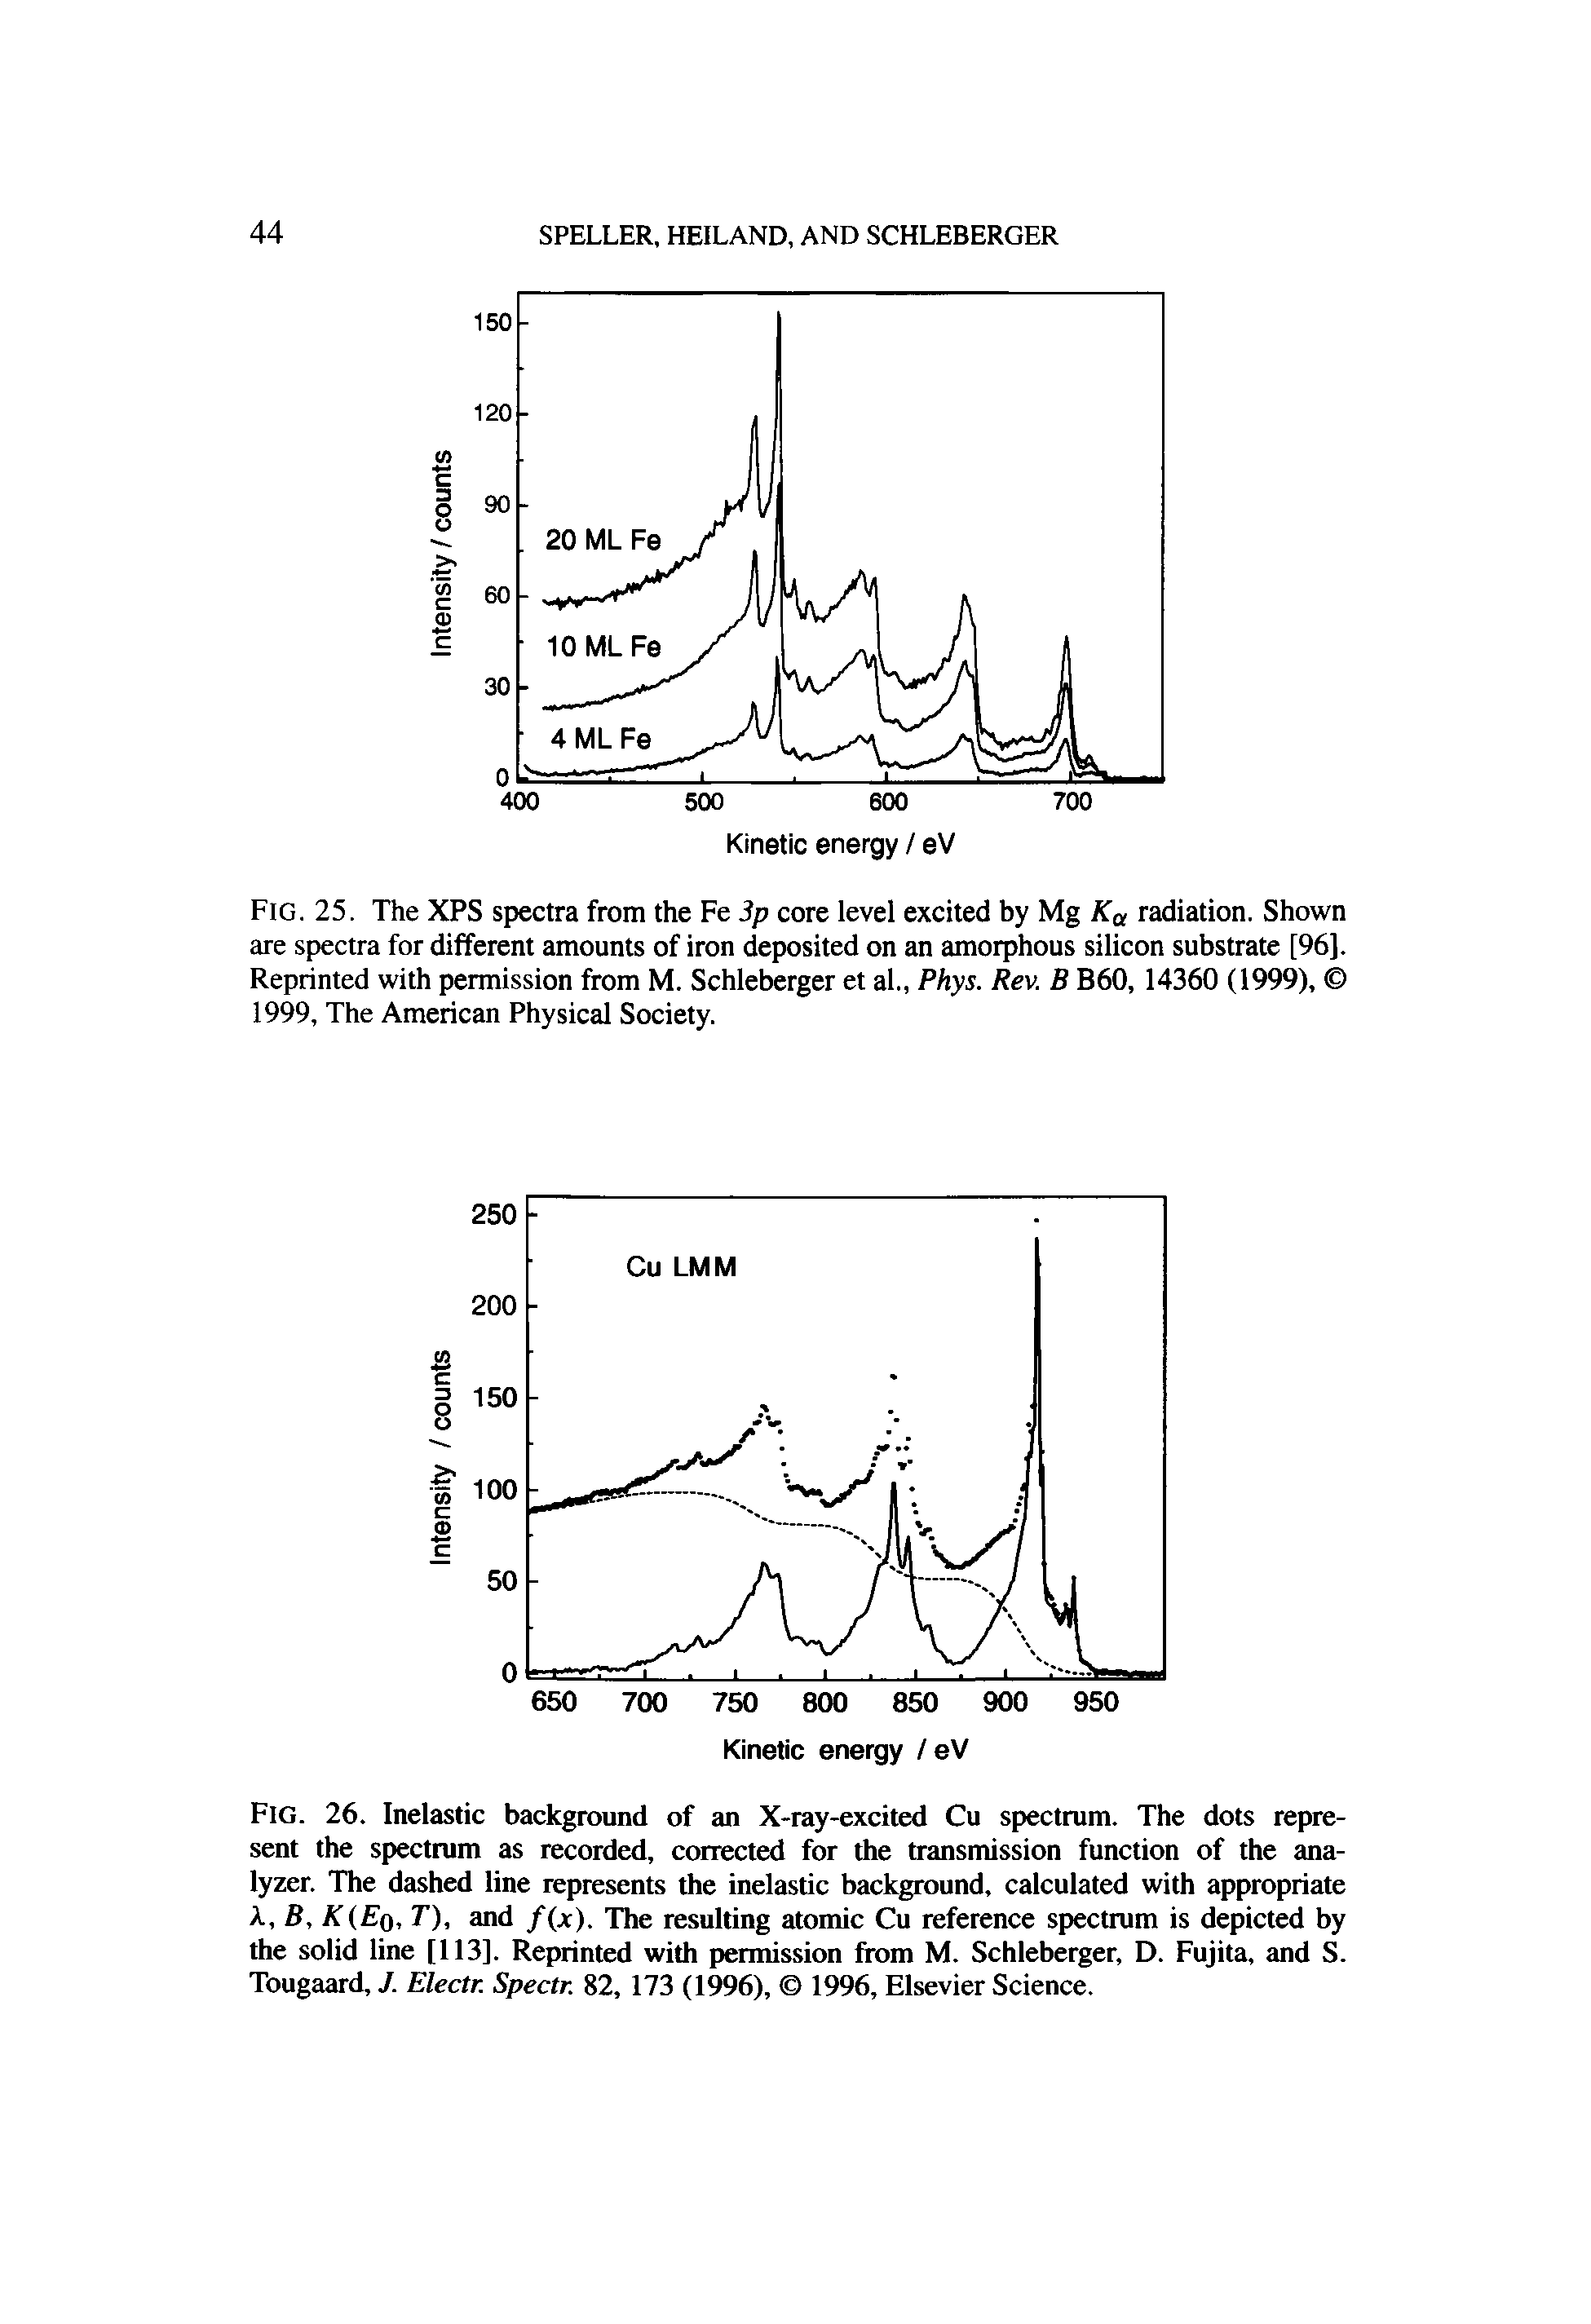 Fig. 26. Inelastic background of an X-ray-excited Cu spectrum. The dots represent the spectrum as recorded, corrected for the transmission function of the analyzer. The dashed line represents the inelastic background, calculated with appropriate A, B,K(Eq, T), and f x). The resulting atomic Cu reference spectrum is depicted by the solid line [113]. Reprinted with permission from M. Schleberger, D. Fujita, and S. Tougaard, J. Electr. Spectr. 82,173 (1996), 1996, Elsevier Science.